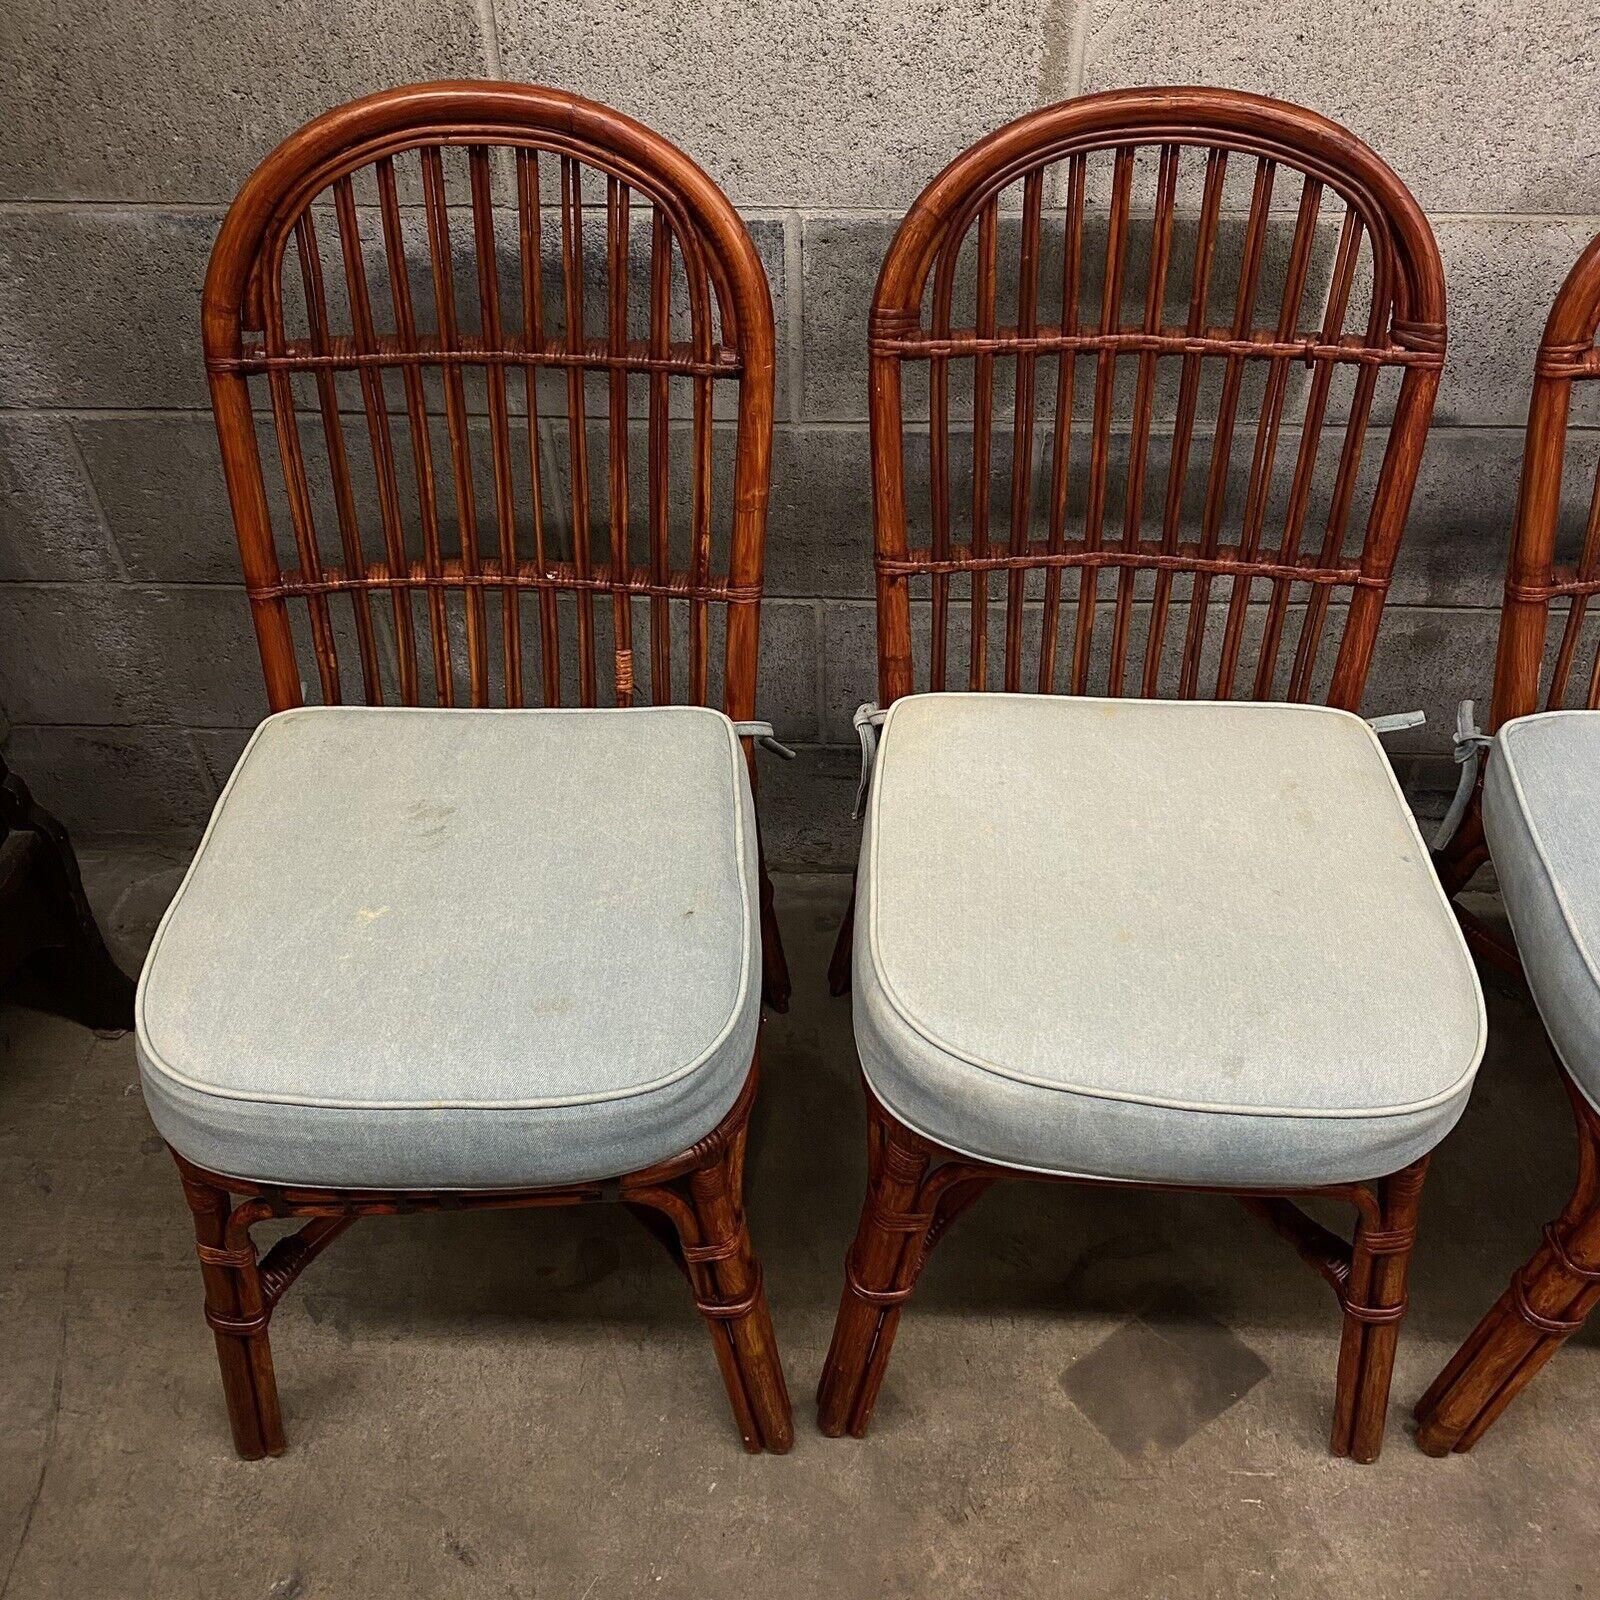 Vintage Hollywood Regency Palm Beach Bamboo Dining Side Chairs - Set of 4 For Sale 2